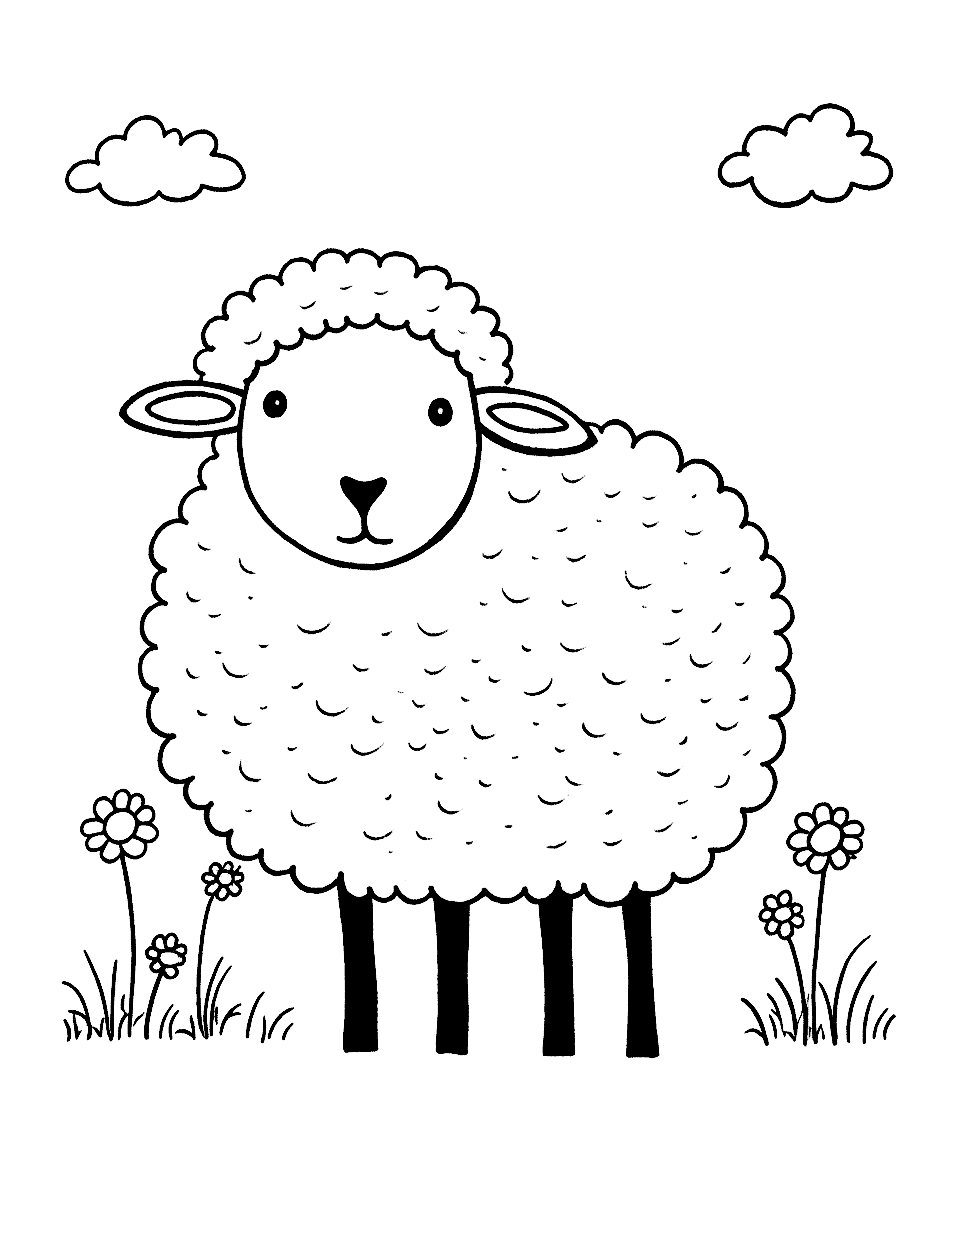 Fluffy Sheep Animal Coloring Page - A fluffy sheep grazing peacefully in a meadow.